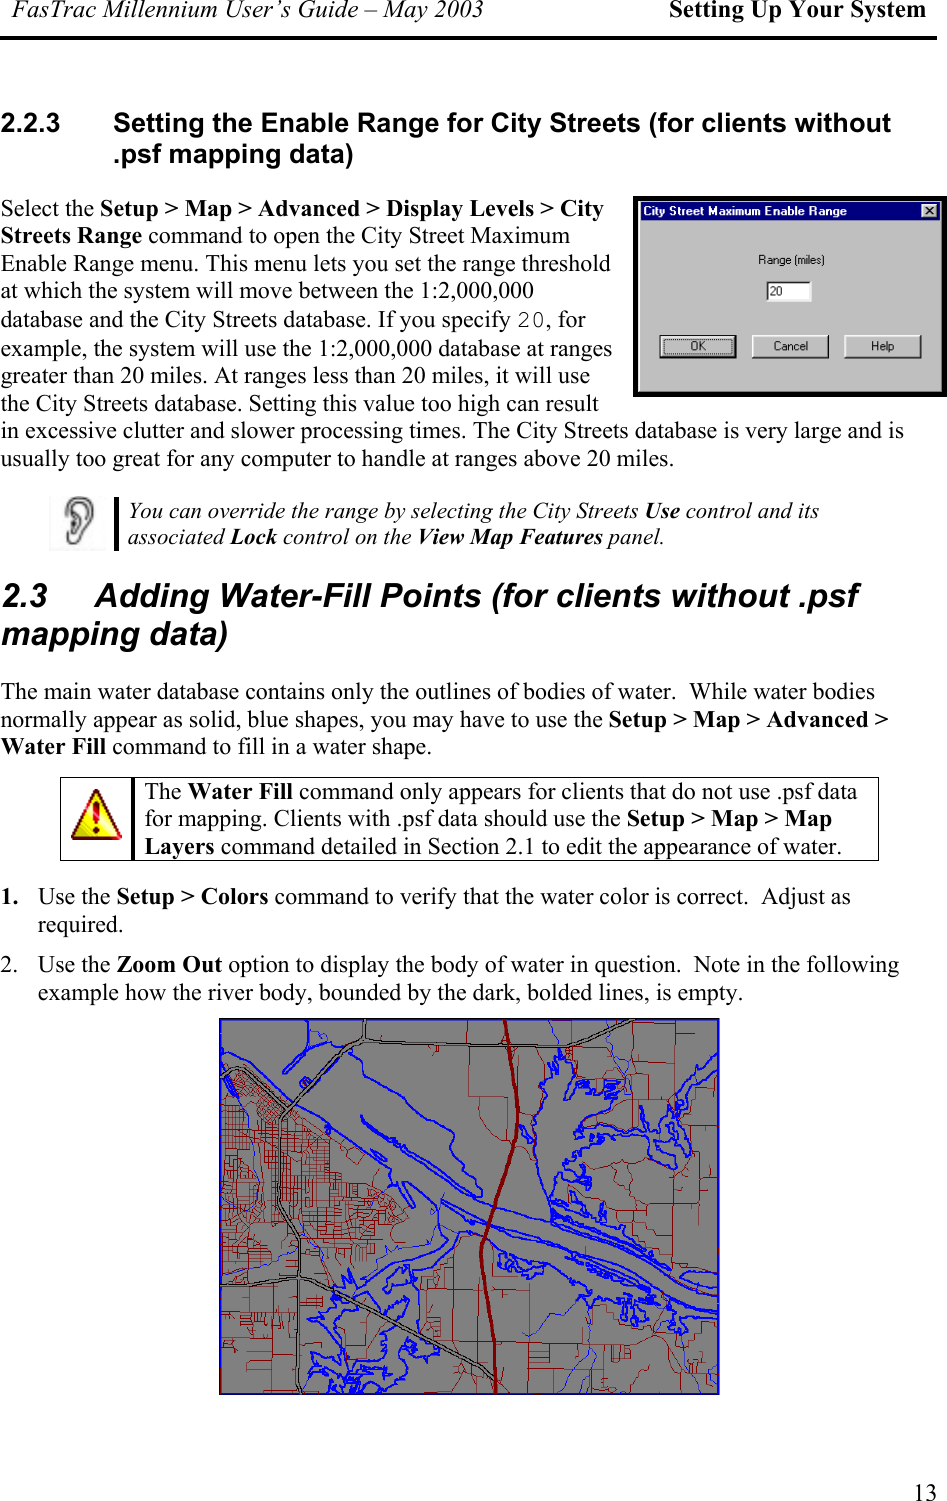 FasTrac Millennium User’s Guide – May 2003 Setting Up Your System 2.2.3  Setting the Enable Range for City Streets (for clients without .psf mapping data) Select the Setup &gt; Map &gt; Advanced &gt; Display Levels &gt; City Streets Range command to open the City Street Maximum Enable Range menu. This menu lets you set the range threshold at which the system will move between the 1:2,000,000 database and the City Streets database. If you specify 20, for example, the system will use the 1:2,000,000 database at ranges greater than 20 miles. At ranges less than 20 miles, it will use the City Streets database. Setting this value too high can result in excessive clutter and slower processing times. The City Streets database is very large and is usually too great for any computer to handle at ranges above 20 miles.  You can override the range by selecting the City Streets Use control and its associated Lock control on the View Map Features panel. 2.3  Adding Water-Fill Points (for clients without .psf mapping data) The main water database contains only the outlines of bodies of water.  While water bodies normally appear as solid, blue shapes, you may have to use the Setup &gt; Map &gt; Advanced &gt; Water Fill command to fill in a water shape.   The Water Fill command only appears for clients that do not use .psf data for mapping. Clients with .psf data should use the Setup &gt; Map &gt; Map Layers command detailed in Section 2.1 to edit the appearance of water. 1.  Use the Setup &gt; Colors command to verify that the water color is correct.  Adjust as required. 2. Use the Zoom Out option to display the body of water in question.  Note in the following example how the river body, bounded by the dark, bolded lines, is empty.  13 